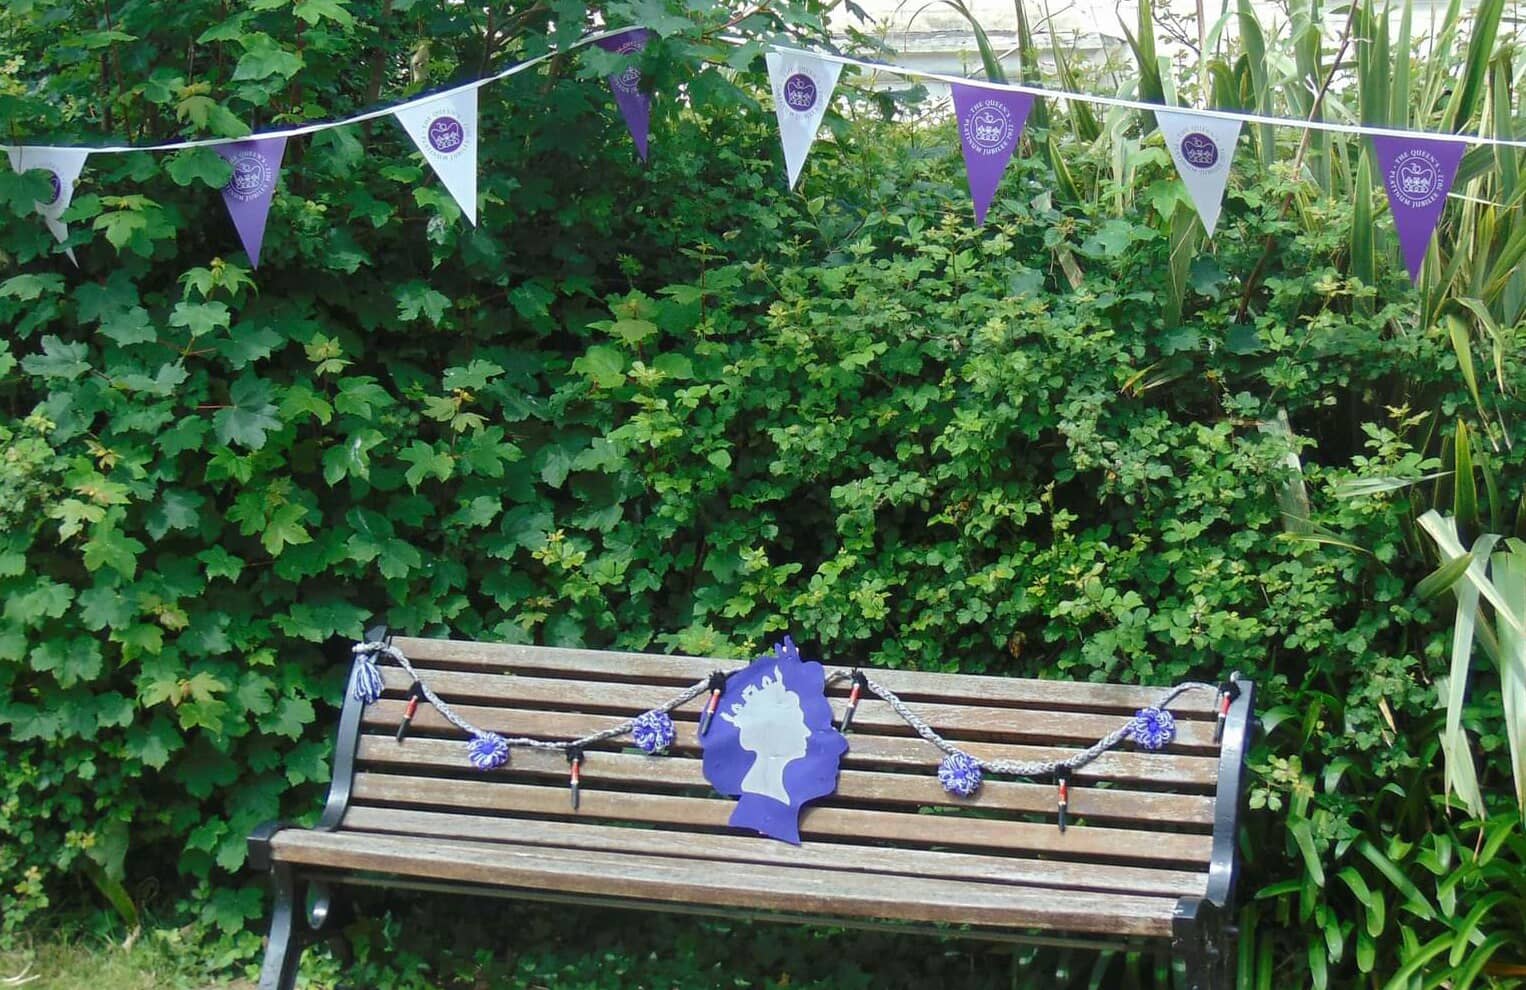 Jubilee bunting in East Cowes on a bench